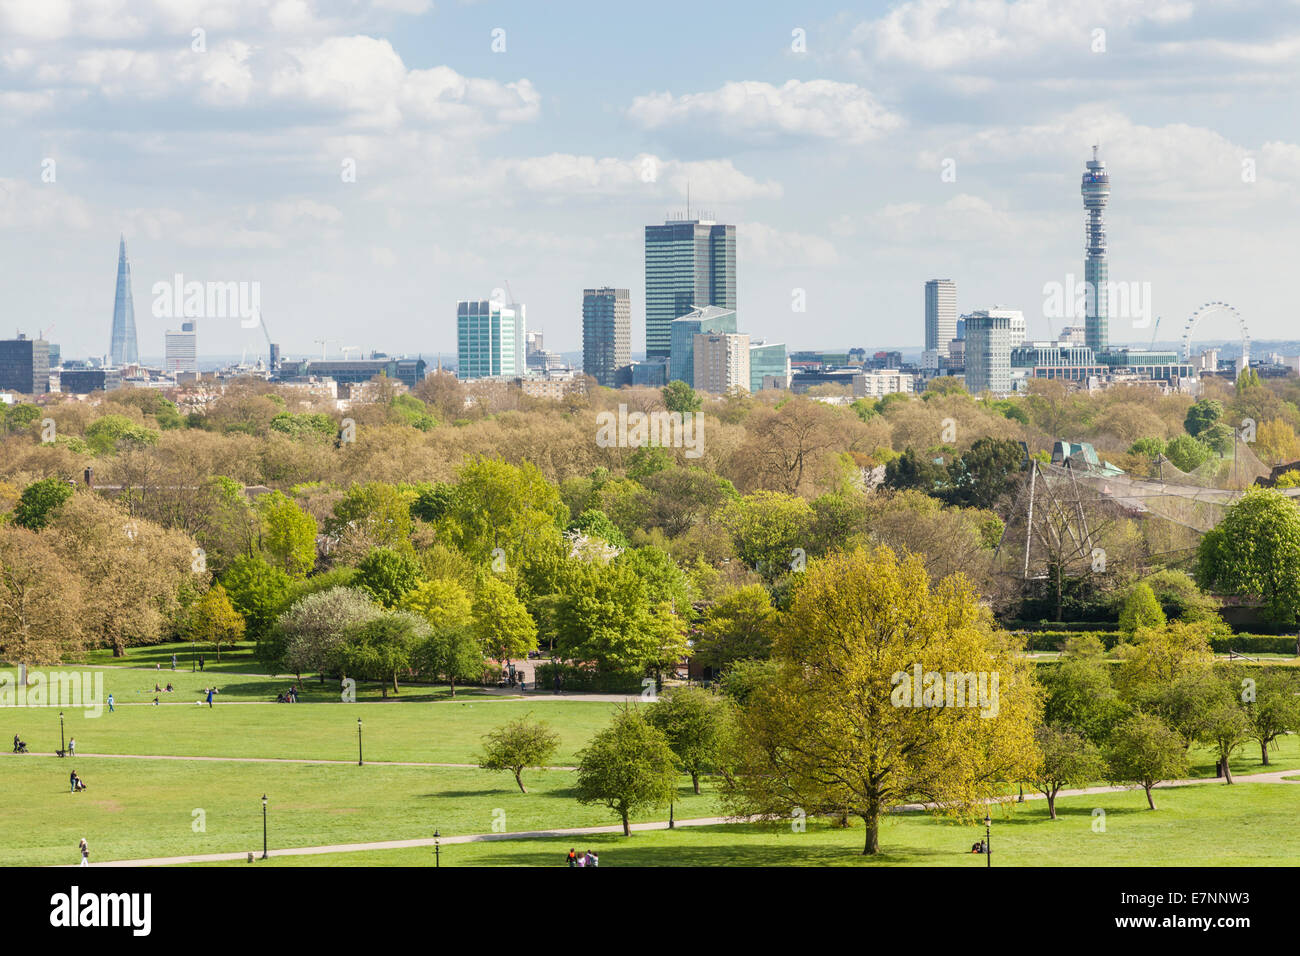 A view of the London skyline from Primrose Hill, London, England, UK Stock Photo